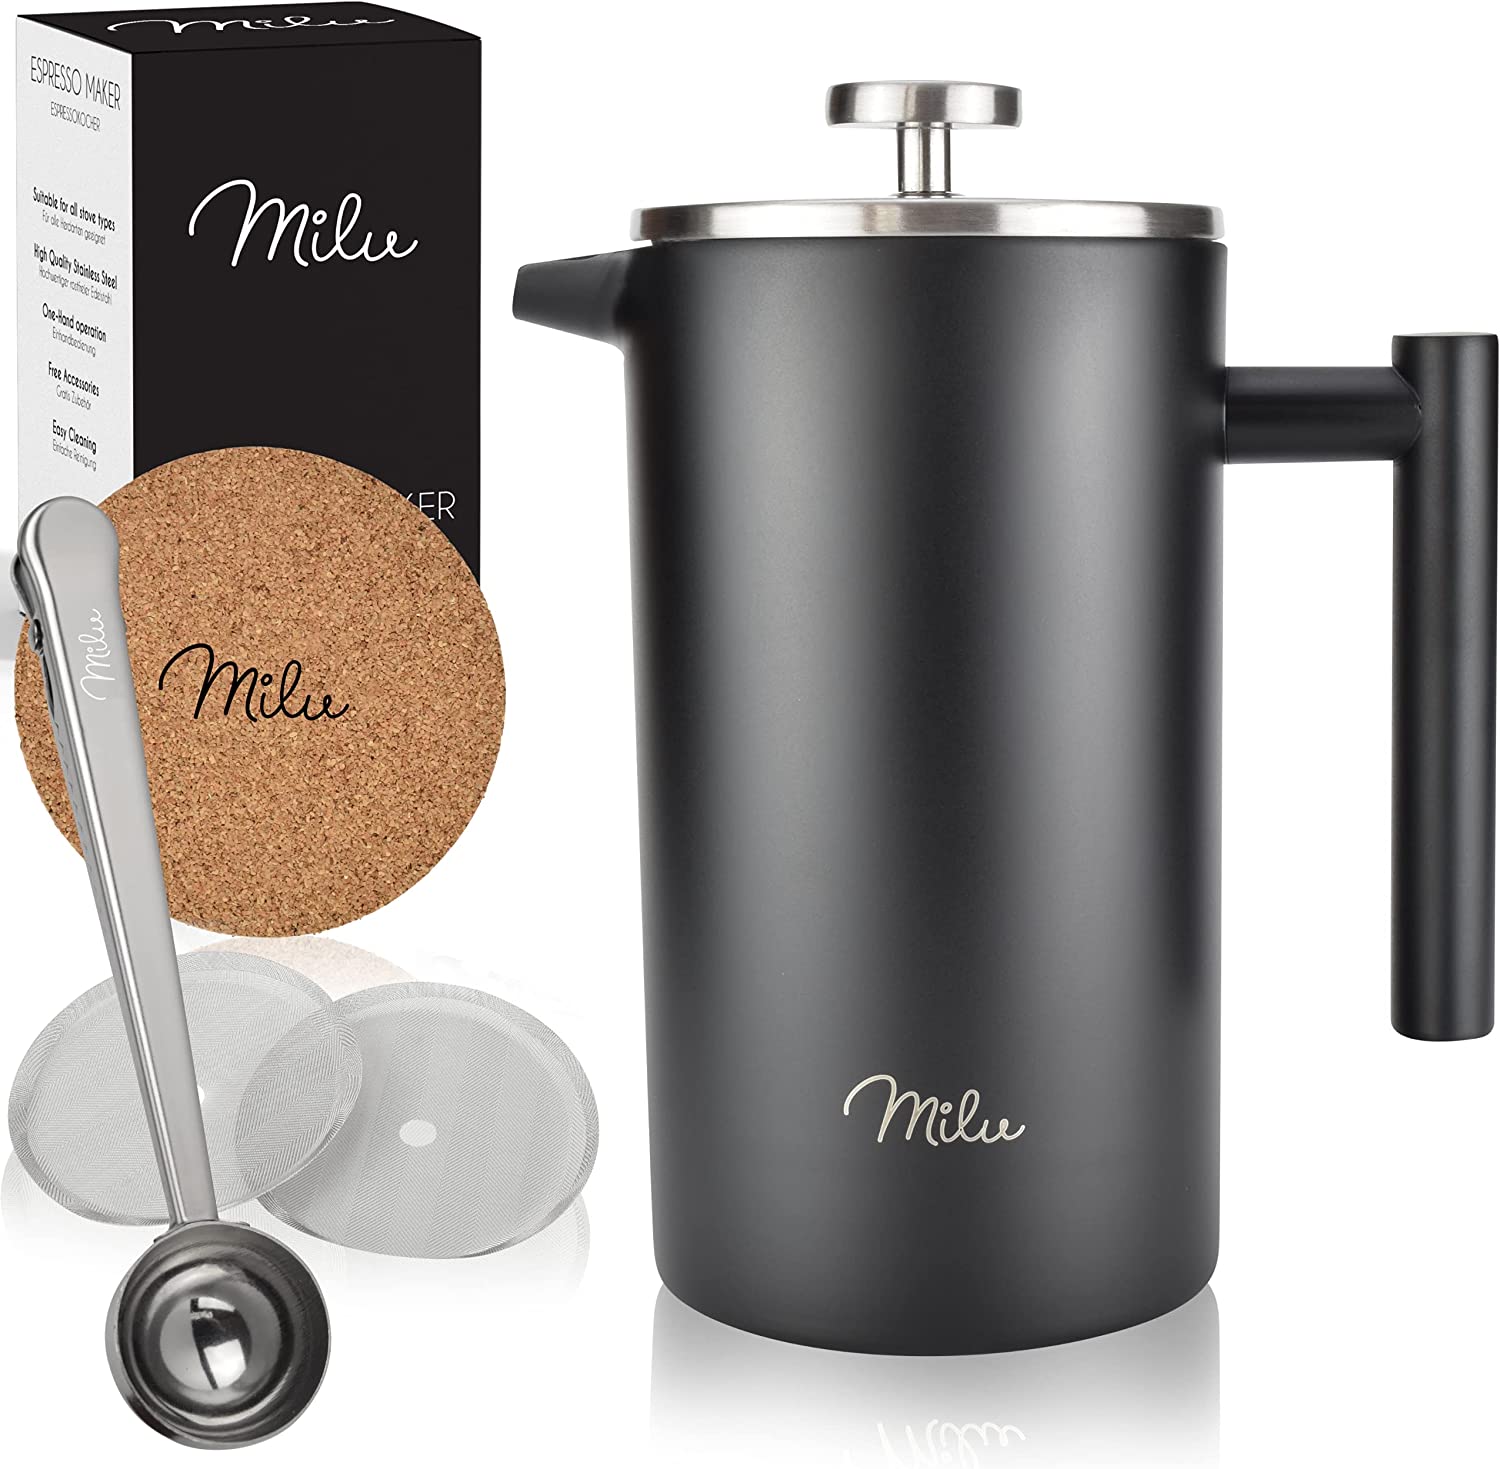 Milu French Press Coffee Maker | 350ml, 600ml, 1L | Stainless Steel Coffee Press Coffee Maker for Home Travel Camping Includes Coaster, Spoon, Replacement Filter (Black, 1000ml (5 Cups)